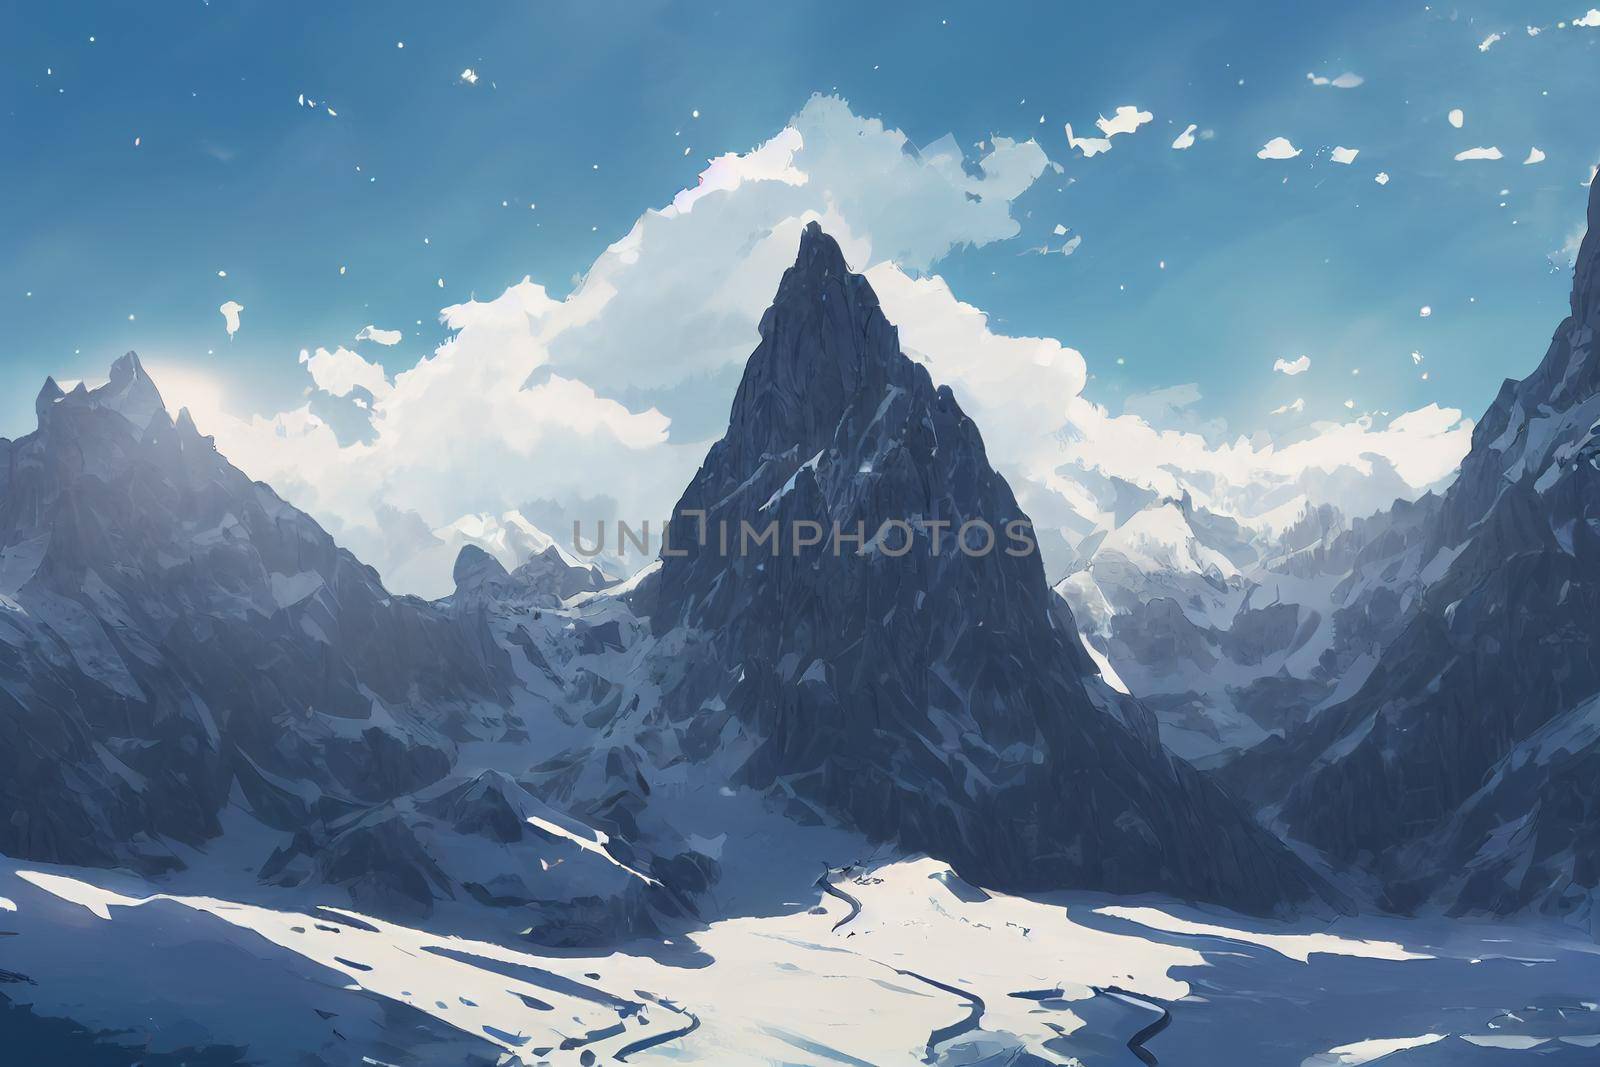 The mountain in the zugspitze arena, anime style, webtoon style